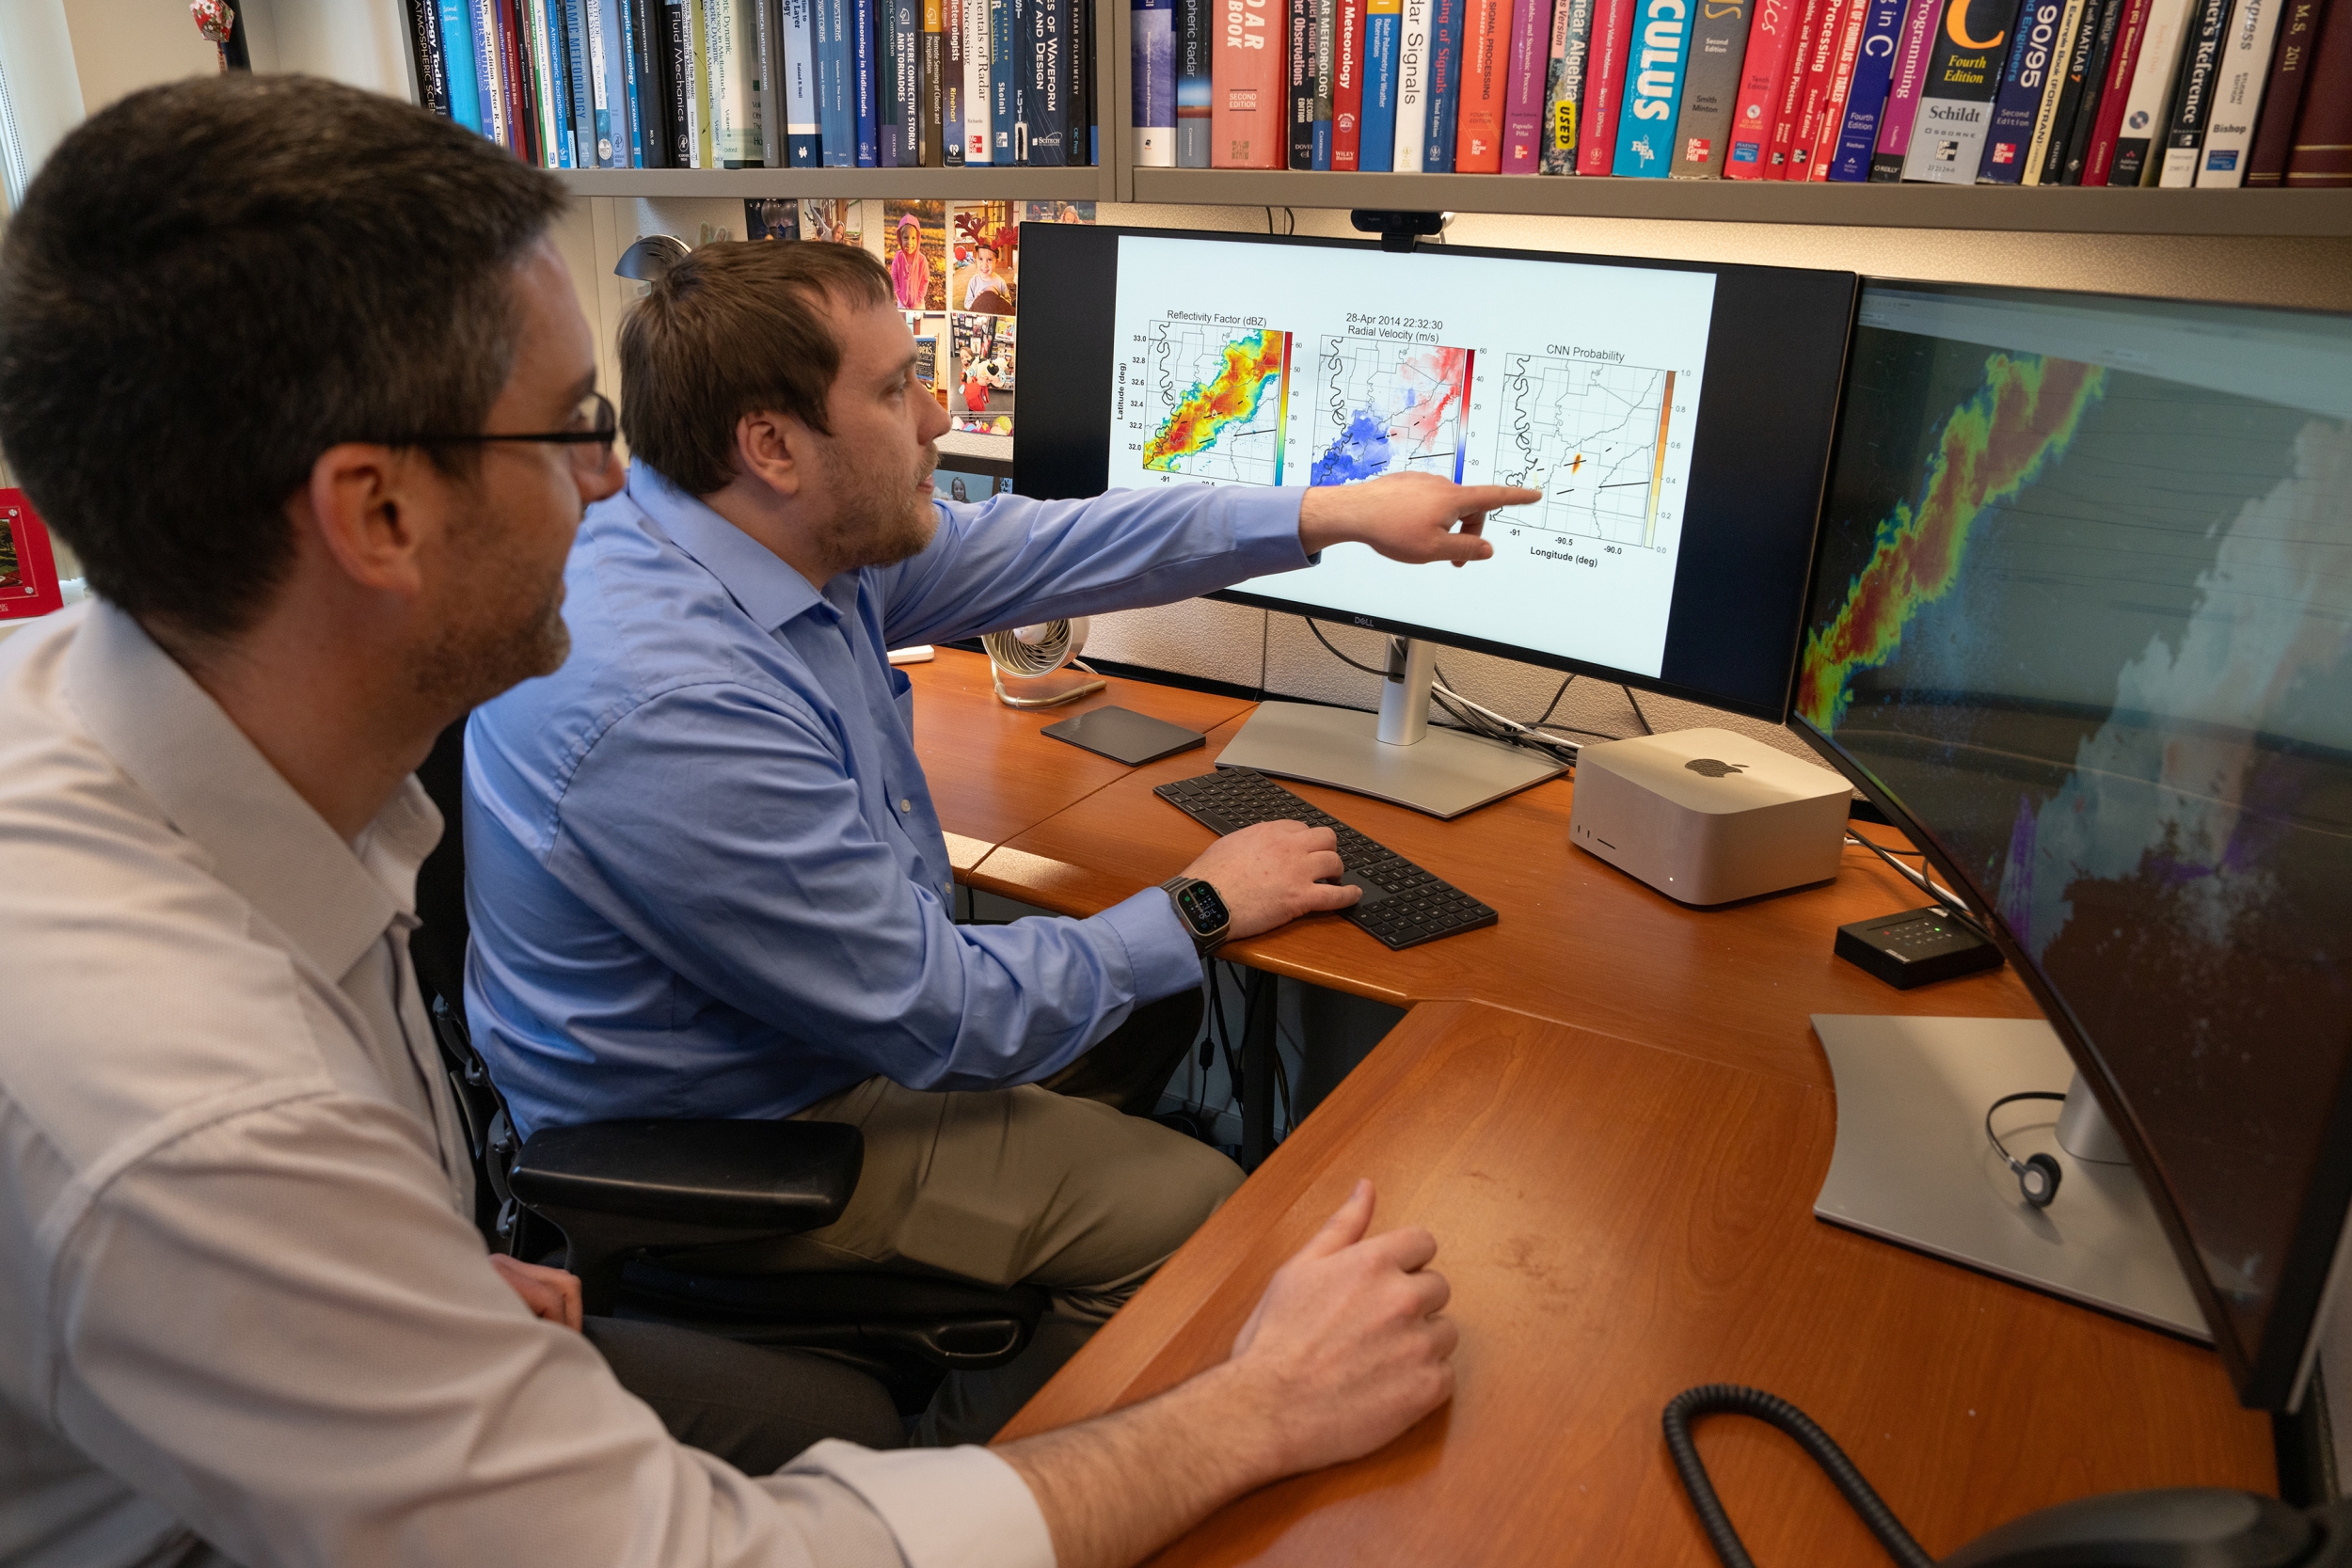 two scientists sit at a desk in front of two computer screens; the screens show radar images of tornadoes.